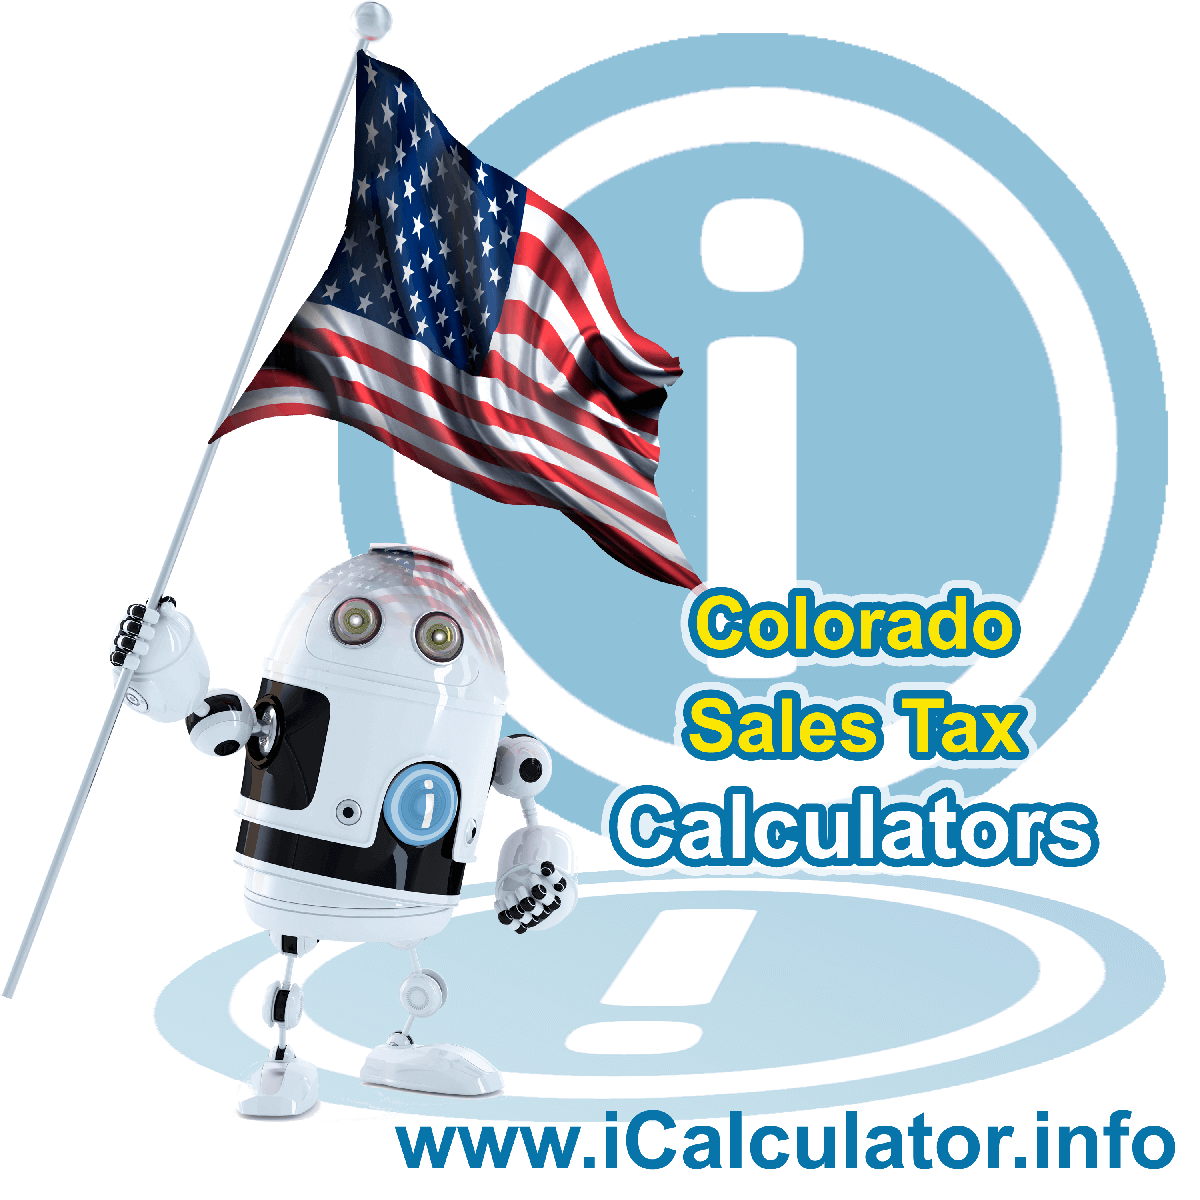 Walsh Sales Rates: This image illustrates a calculator robot calculating Walsh sales tax manually using the Walsh Sales Tax Formula. You can use this information to calculate Walsh Sales Tax manually or use the Walsh Sales Tax Calculator to calculate sales tax online.